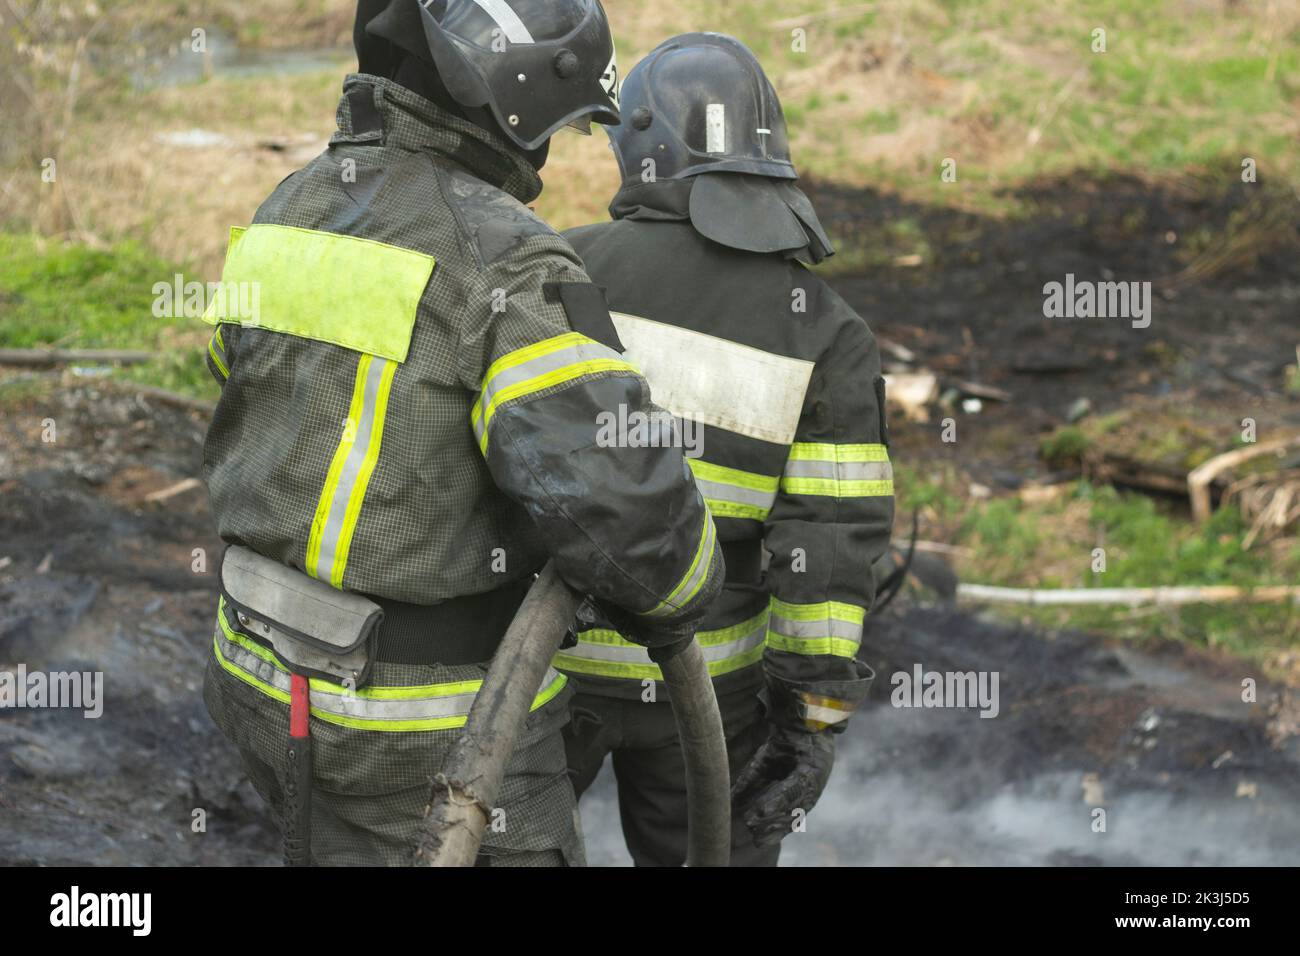 Lifeguard on duty. Firefighter puts out fire. Details of fire. Rescuer in Russia. Extinguishing fire in forest. Stock Photo